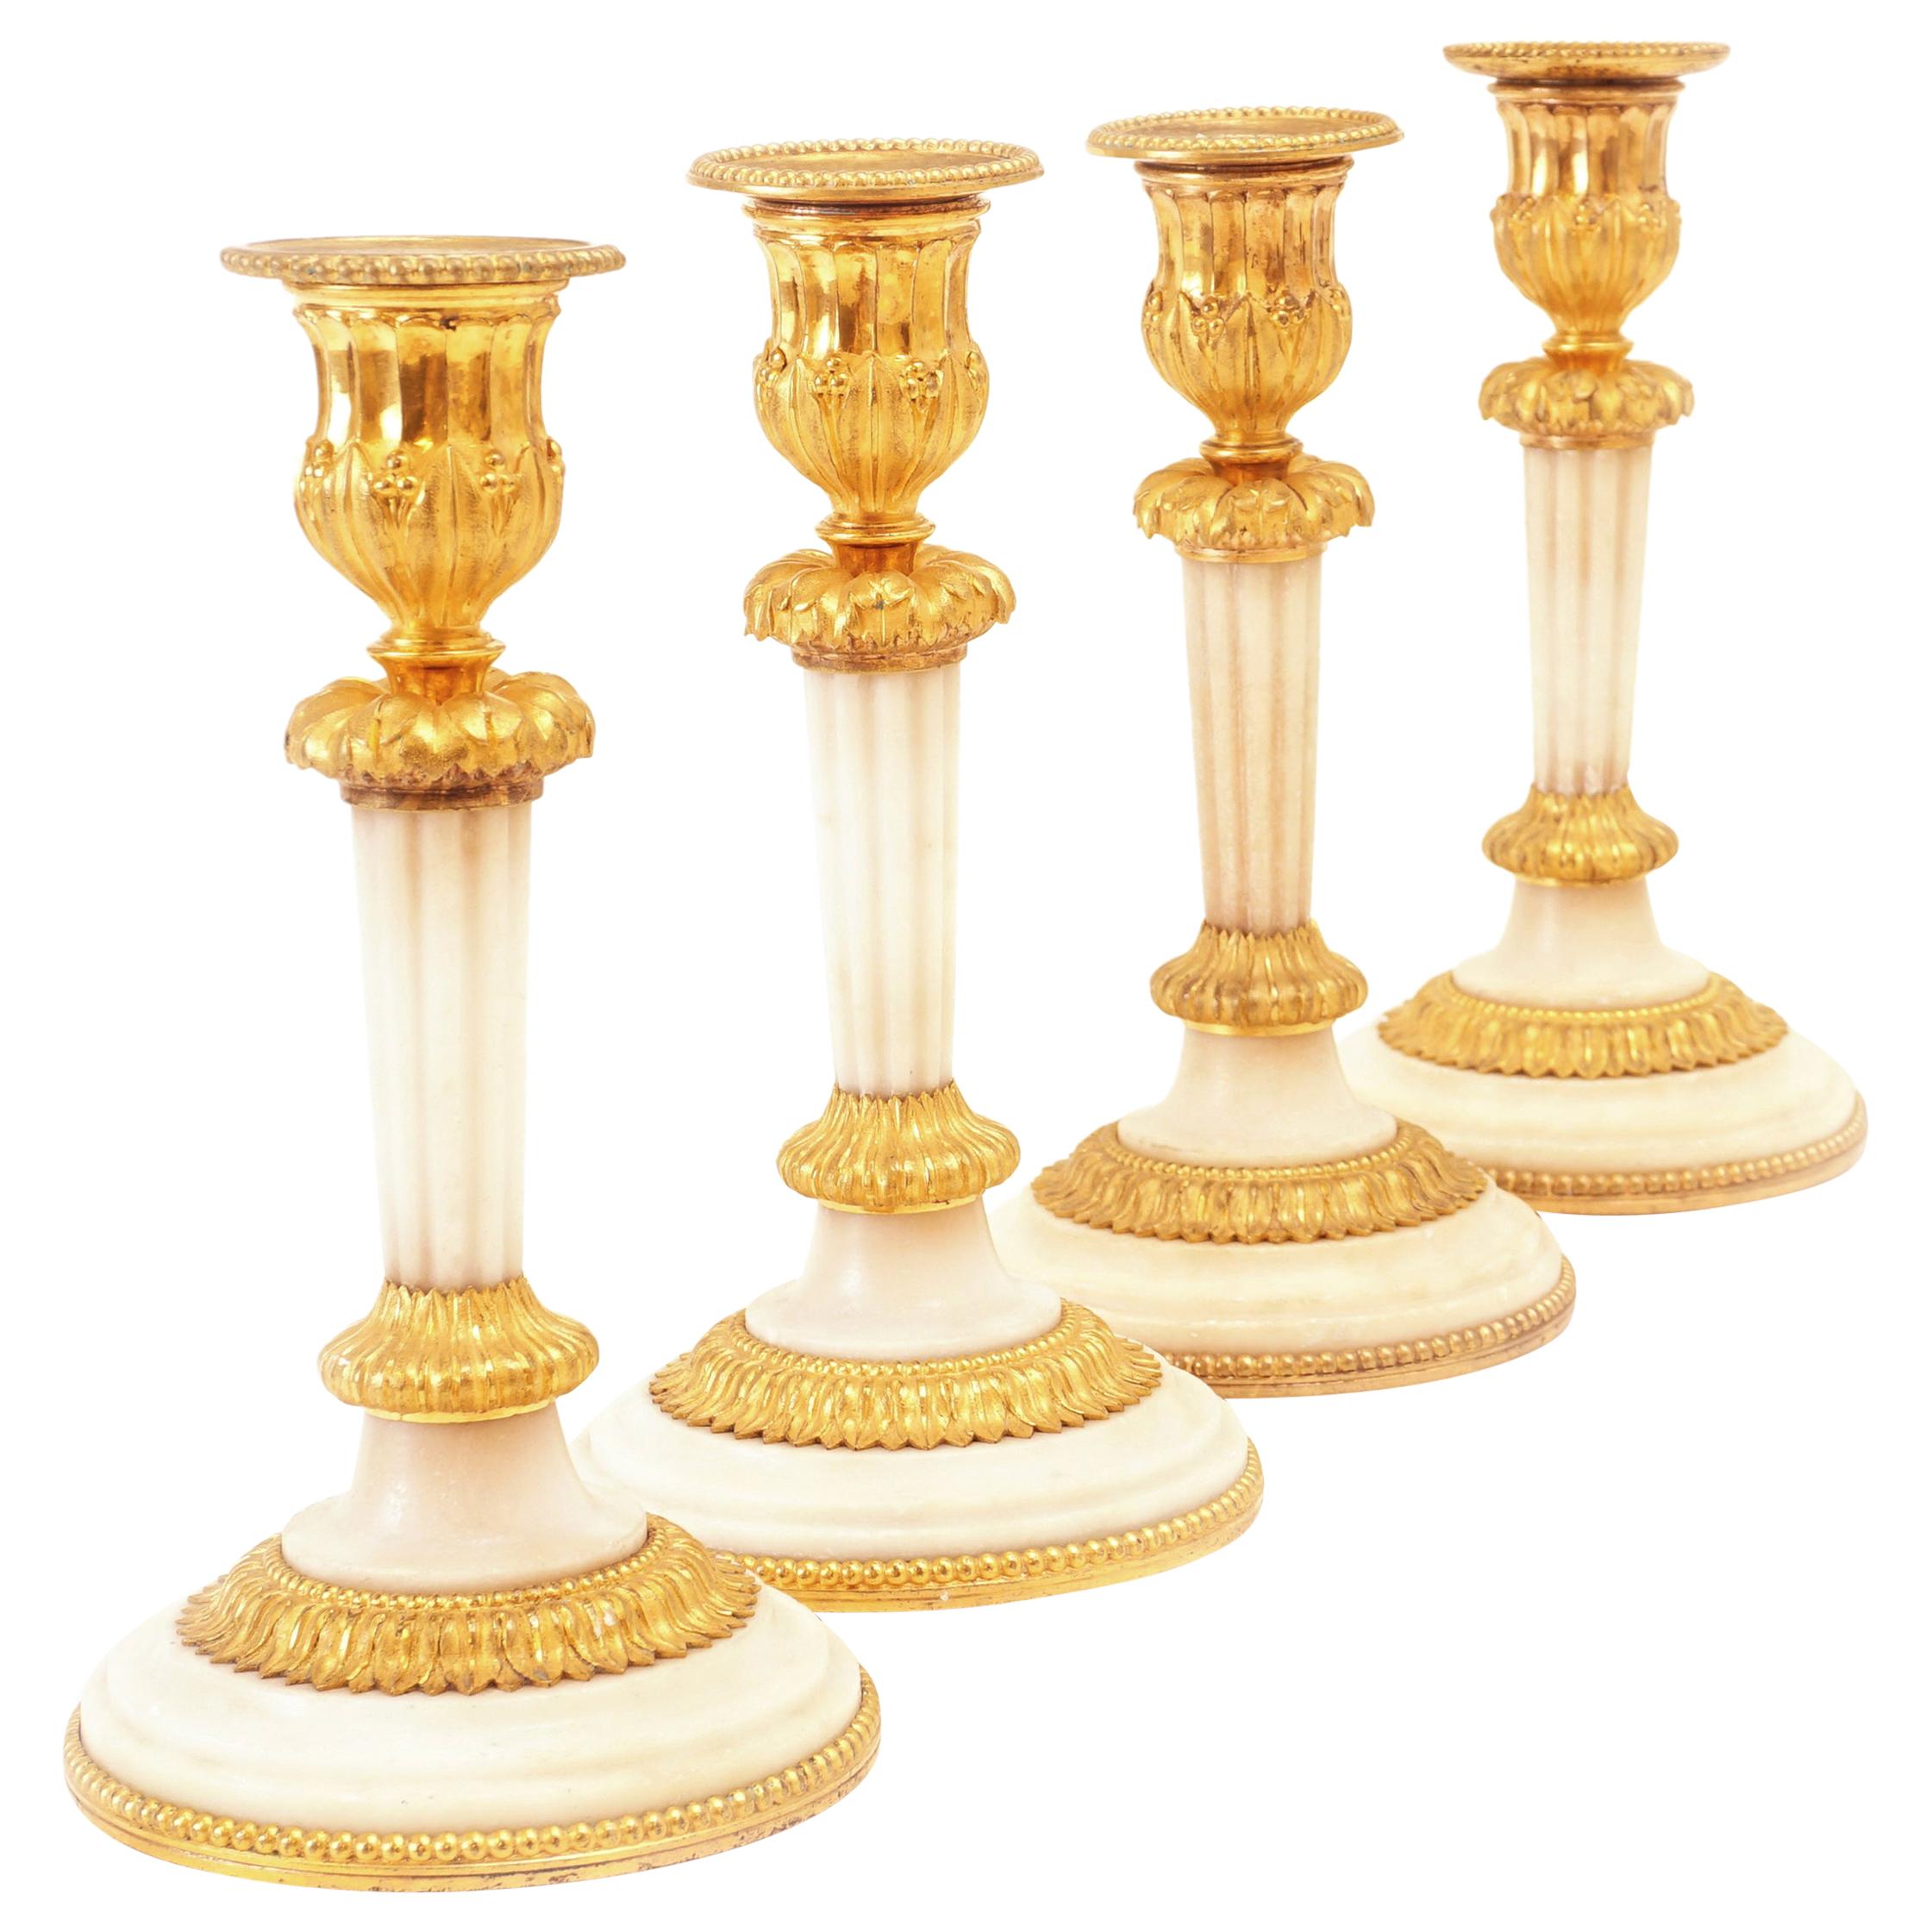 Rare Set of Four Almost Identicial Gilt Bronze Candlesticks with Marble Base For Sale